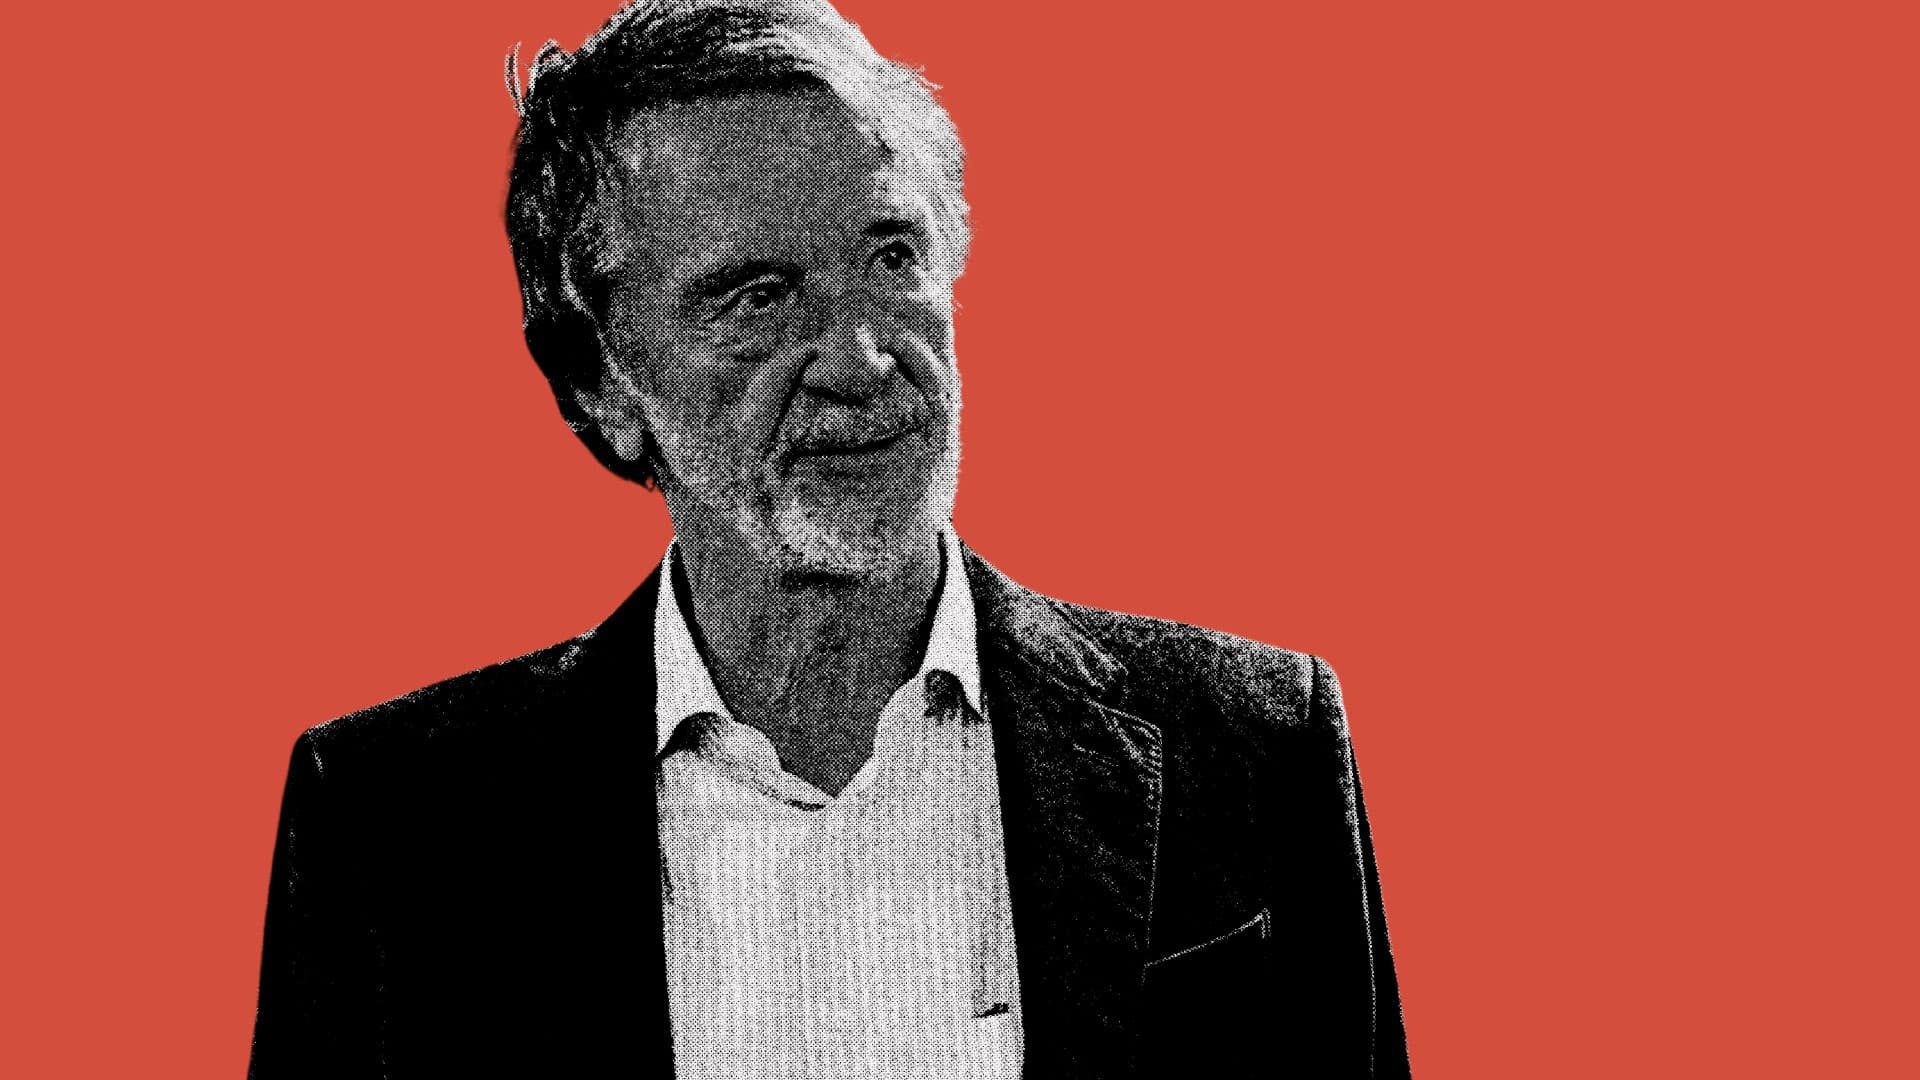 A black and white image of Jim Ratcliffe set against a red background. He looks gormless, as you would have to be to invest in Scum